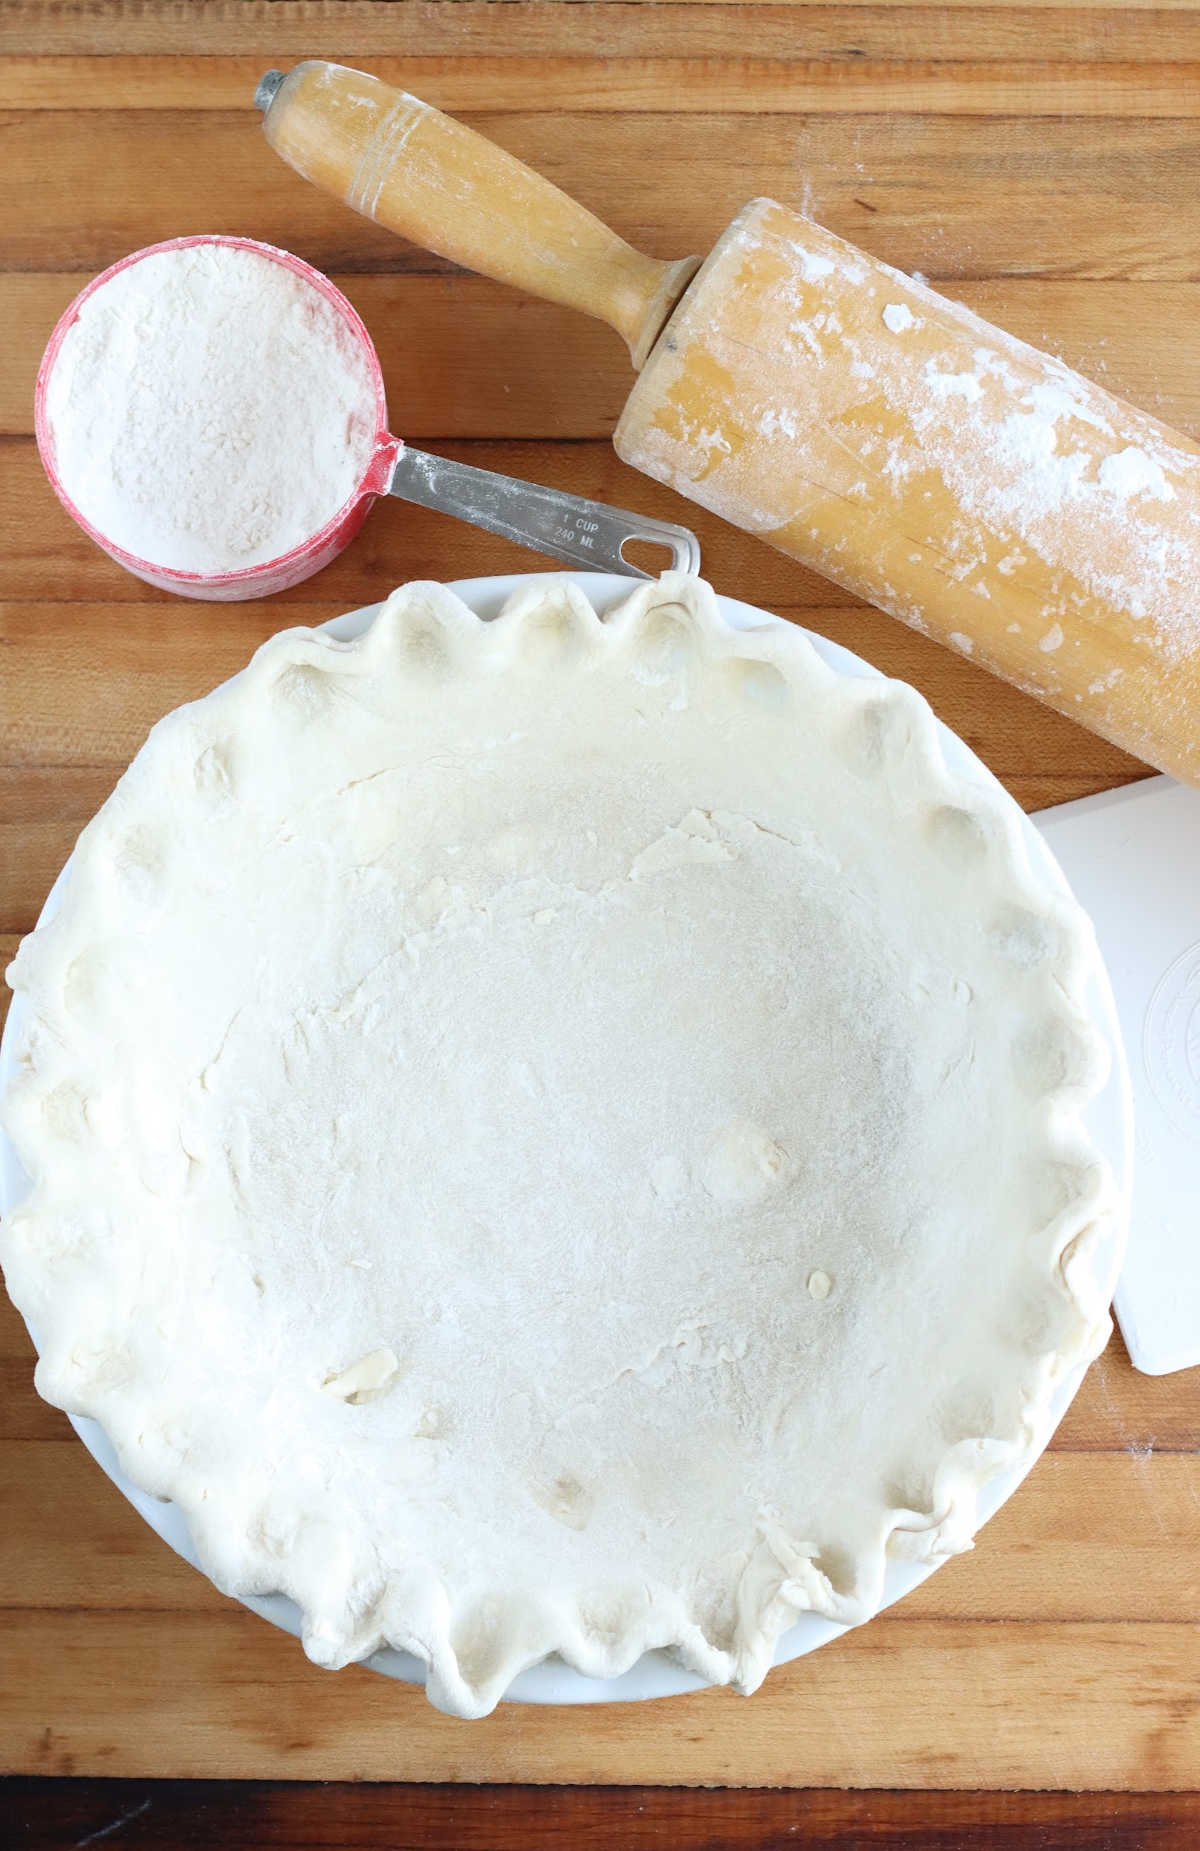 Unbaked pie shell in white pie dish on butcher block, wooden rolling pin, red measuring cup with flour.